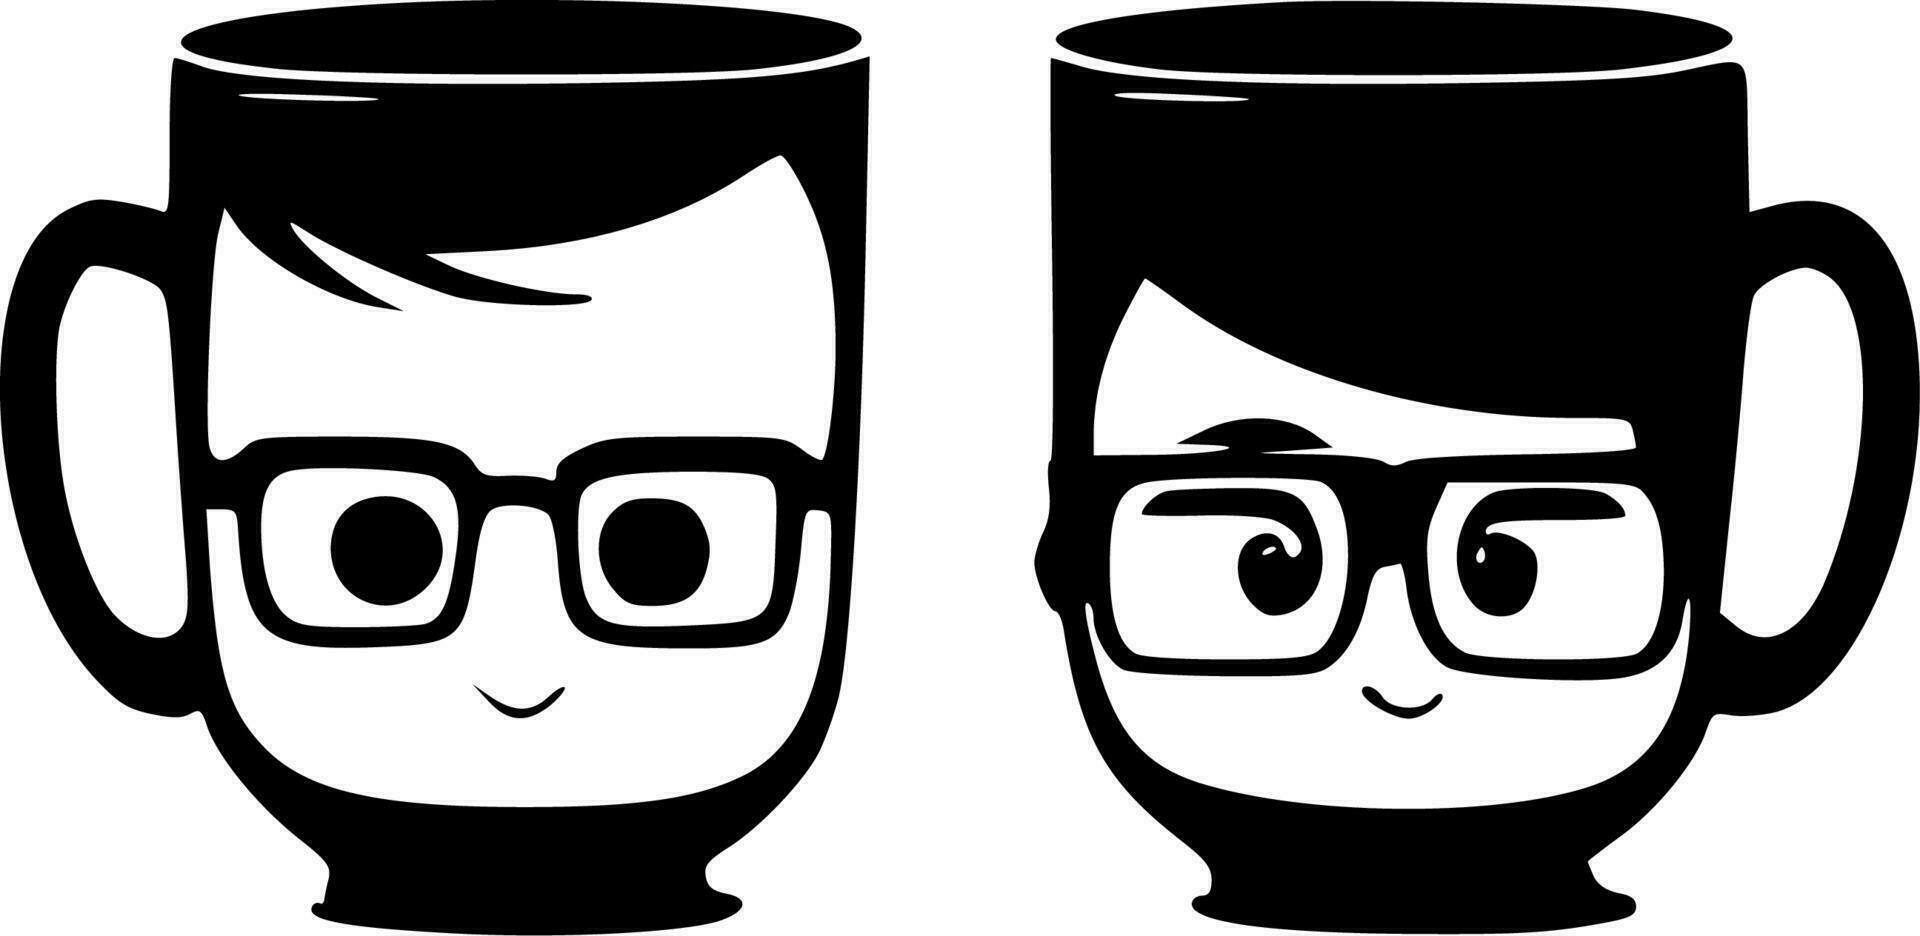 Mugs - Black and White Isolated Icon - Vector illustration